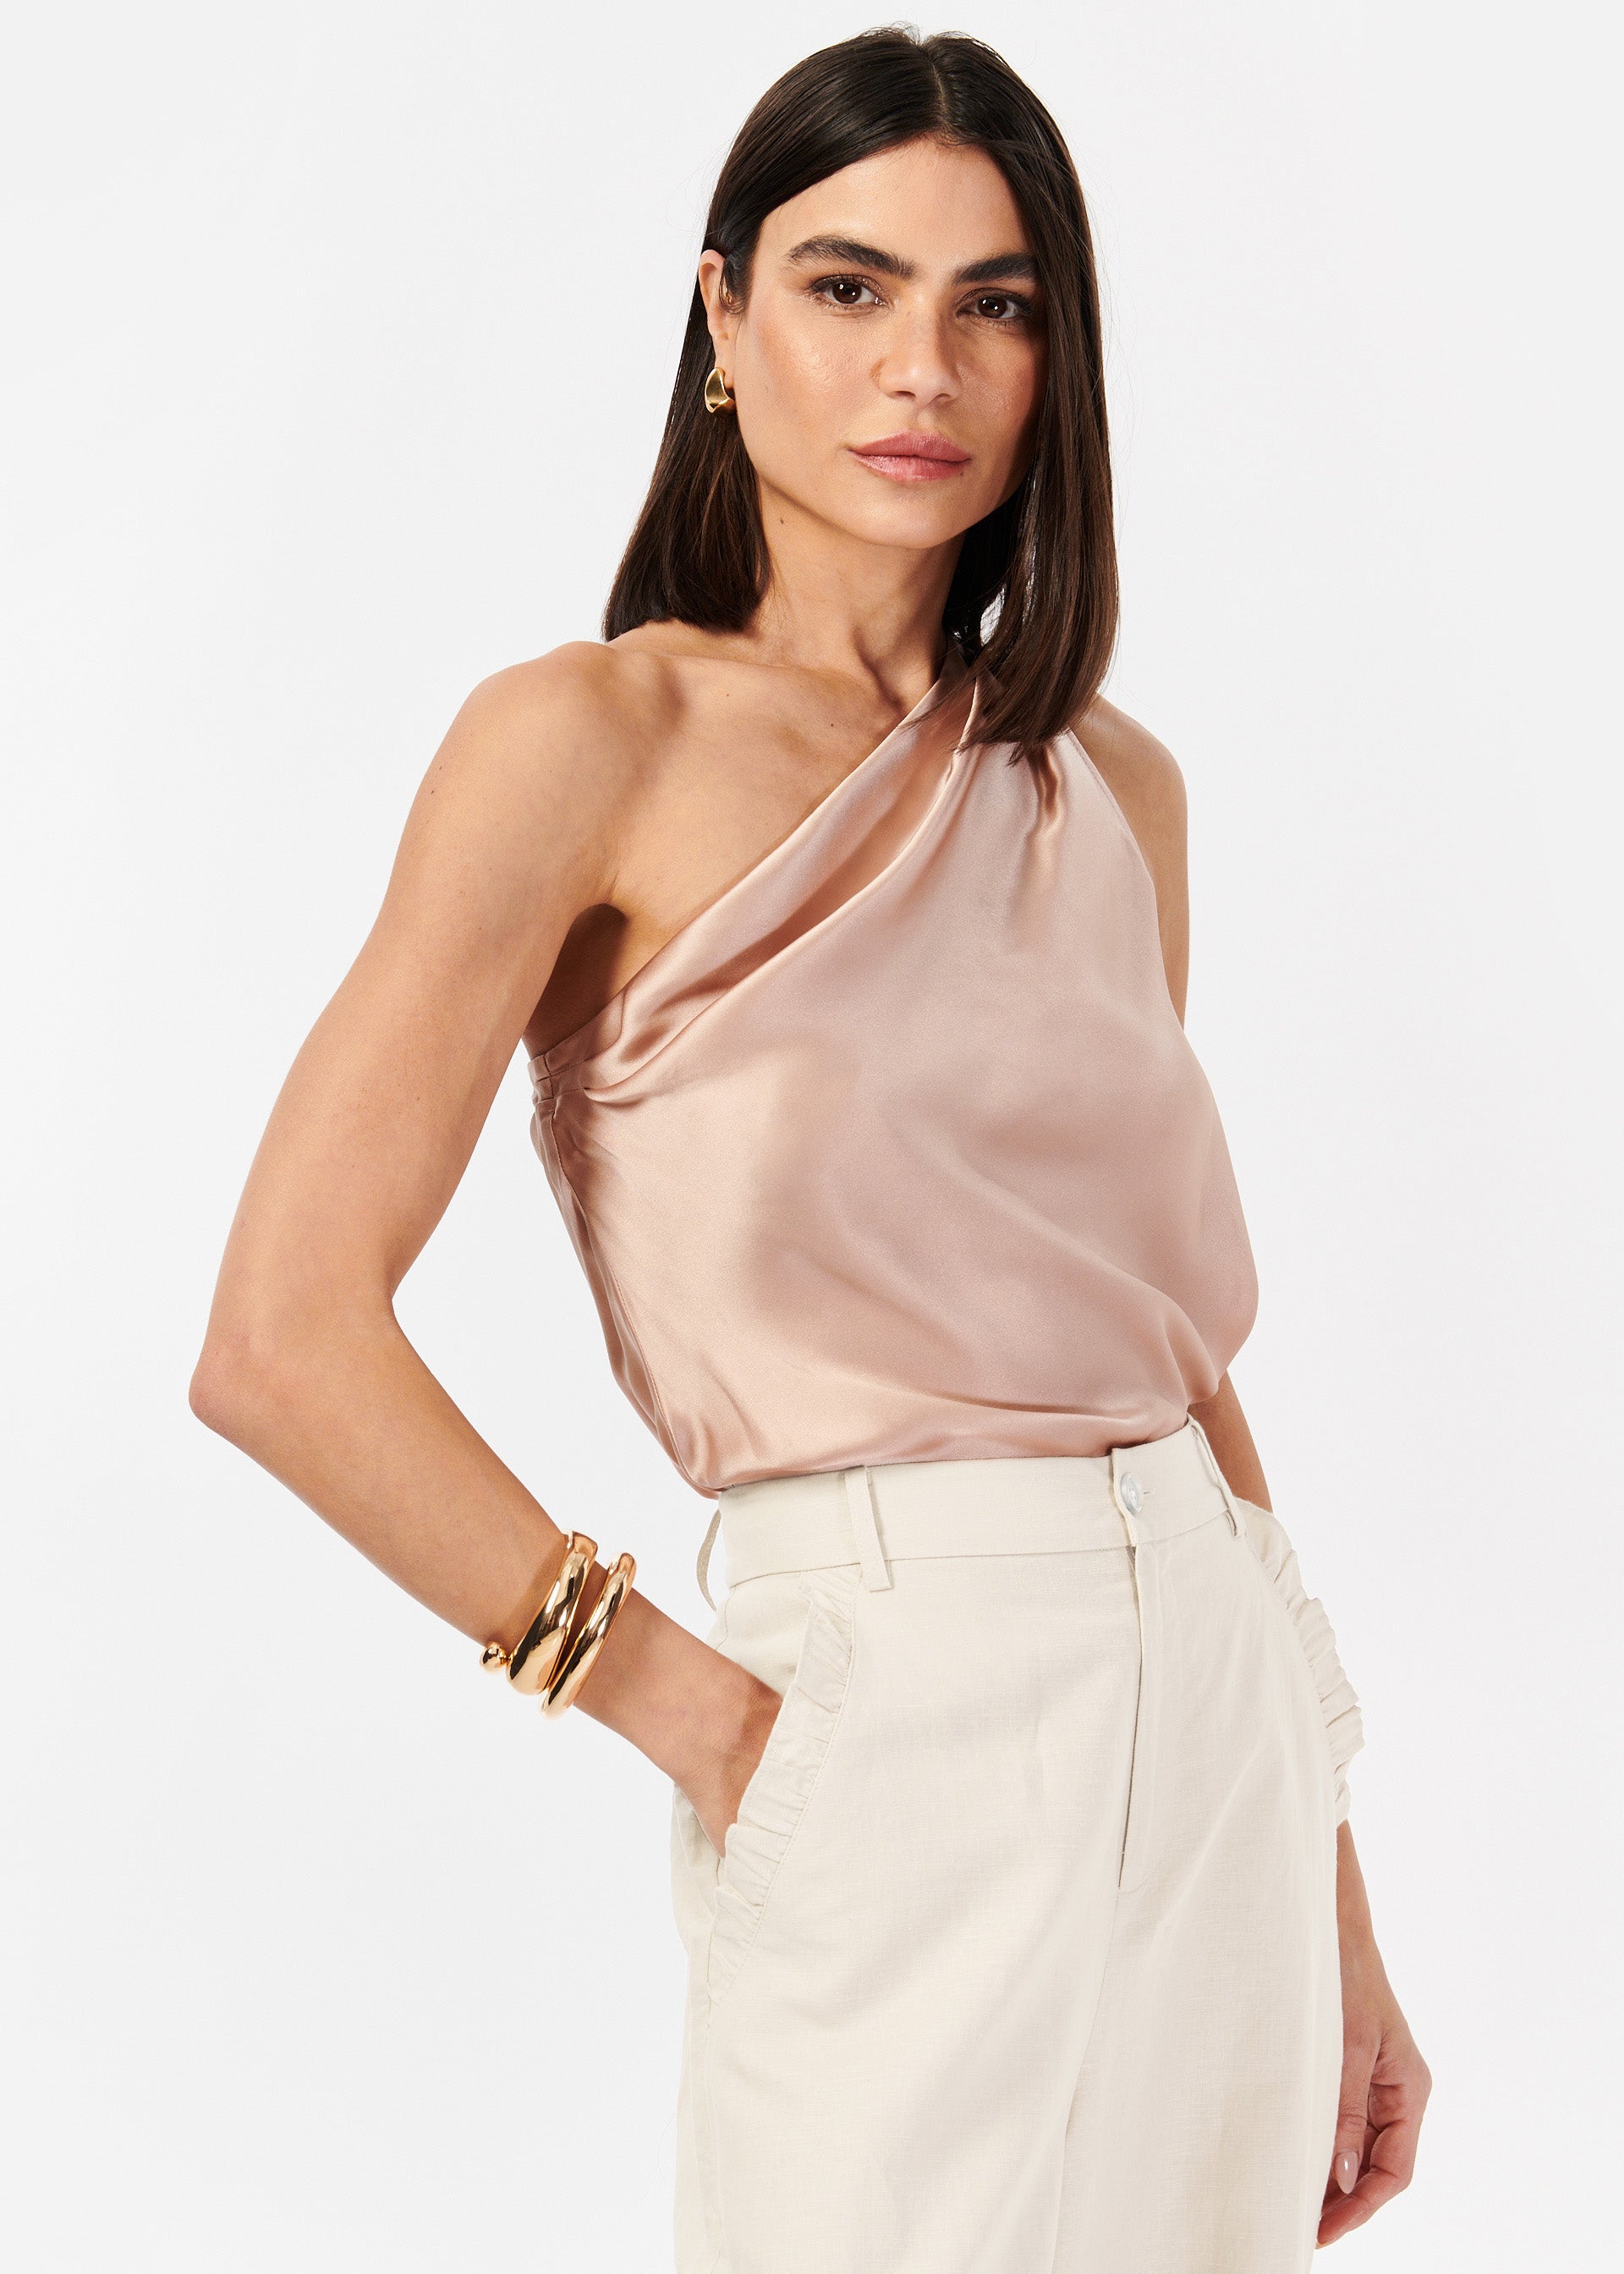 Cami NYC Darby Asymmetric Charmeuse Bodysuit in Brown